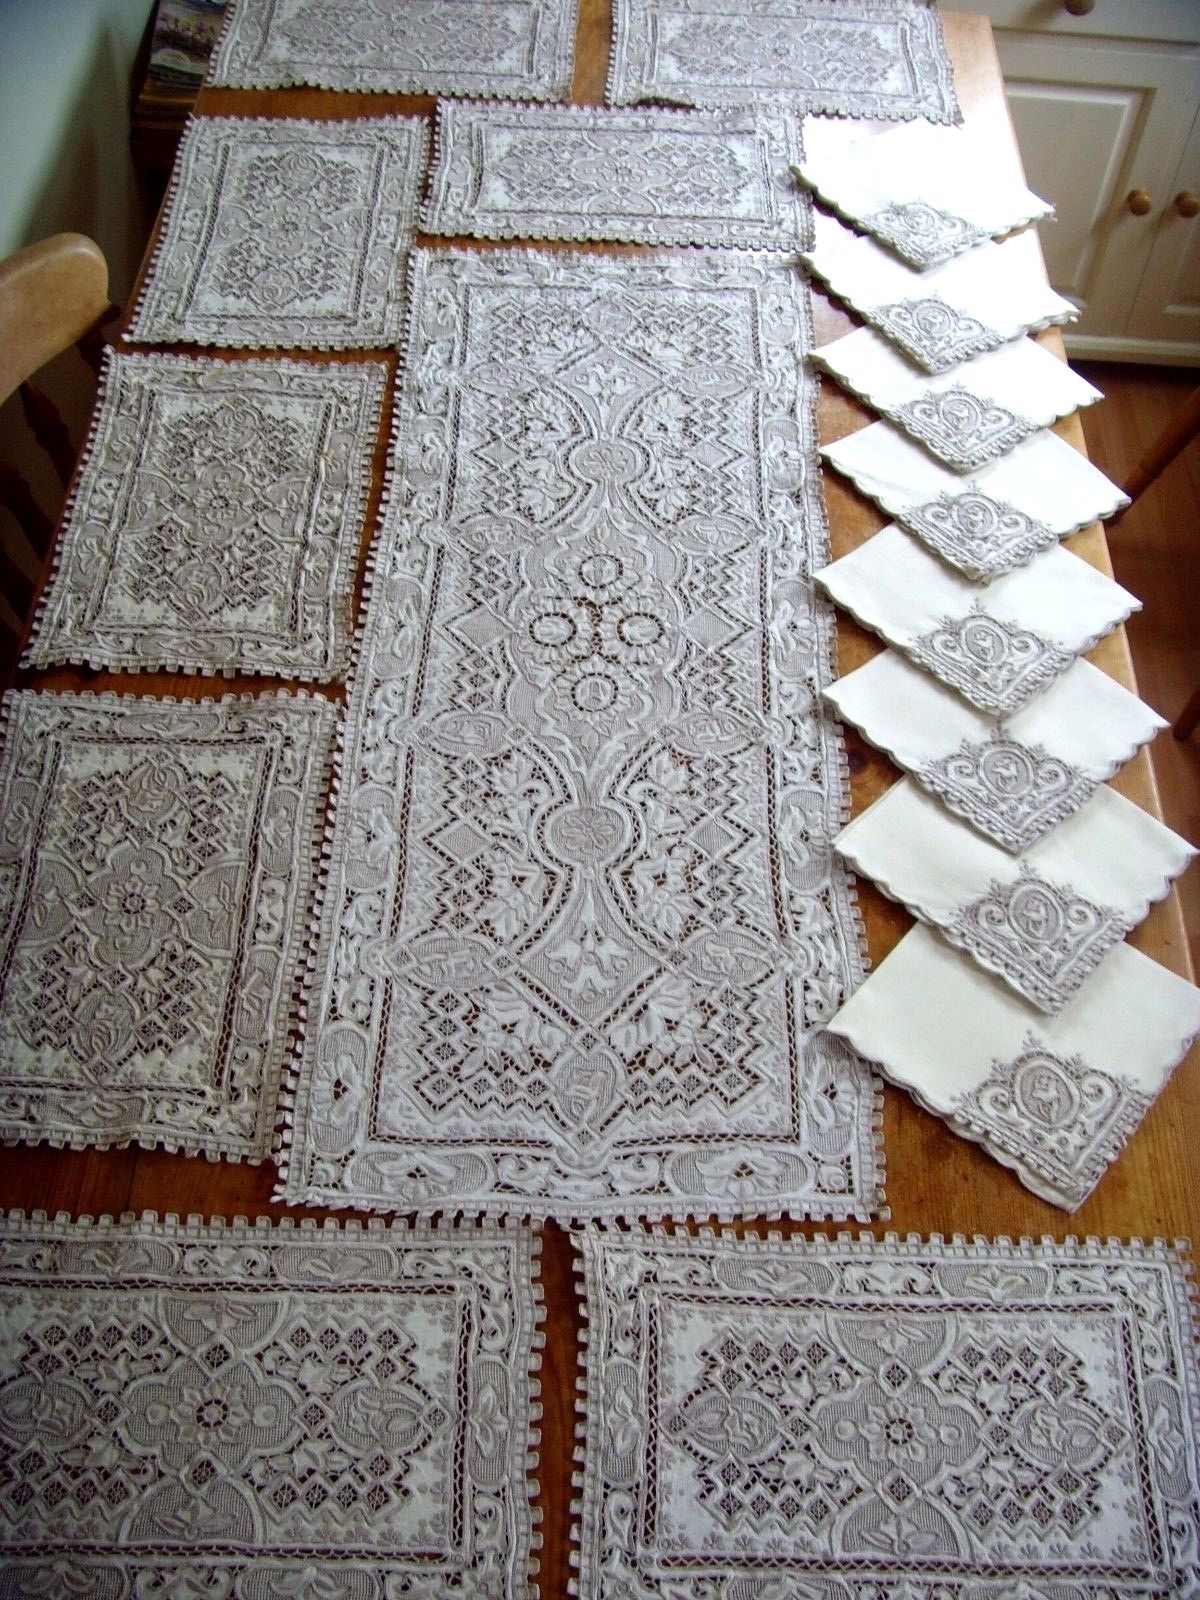 VINTAGE HAND EMBROIDERED GREAT WALL LACE SET TABLECLOTH / RUNNER NAPKINS MATS